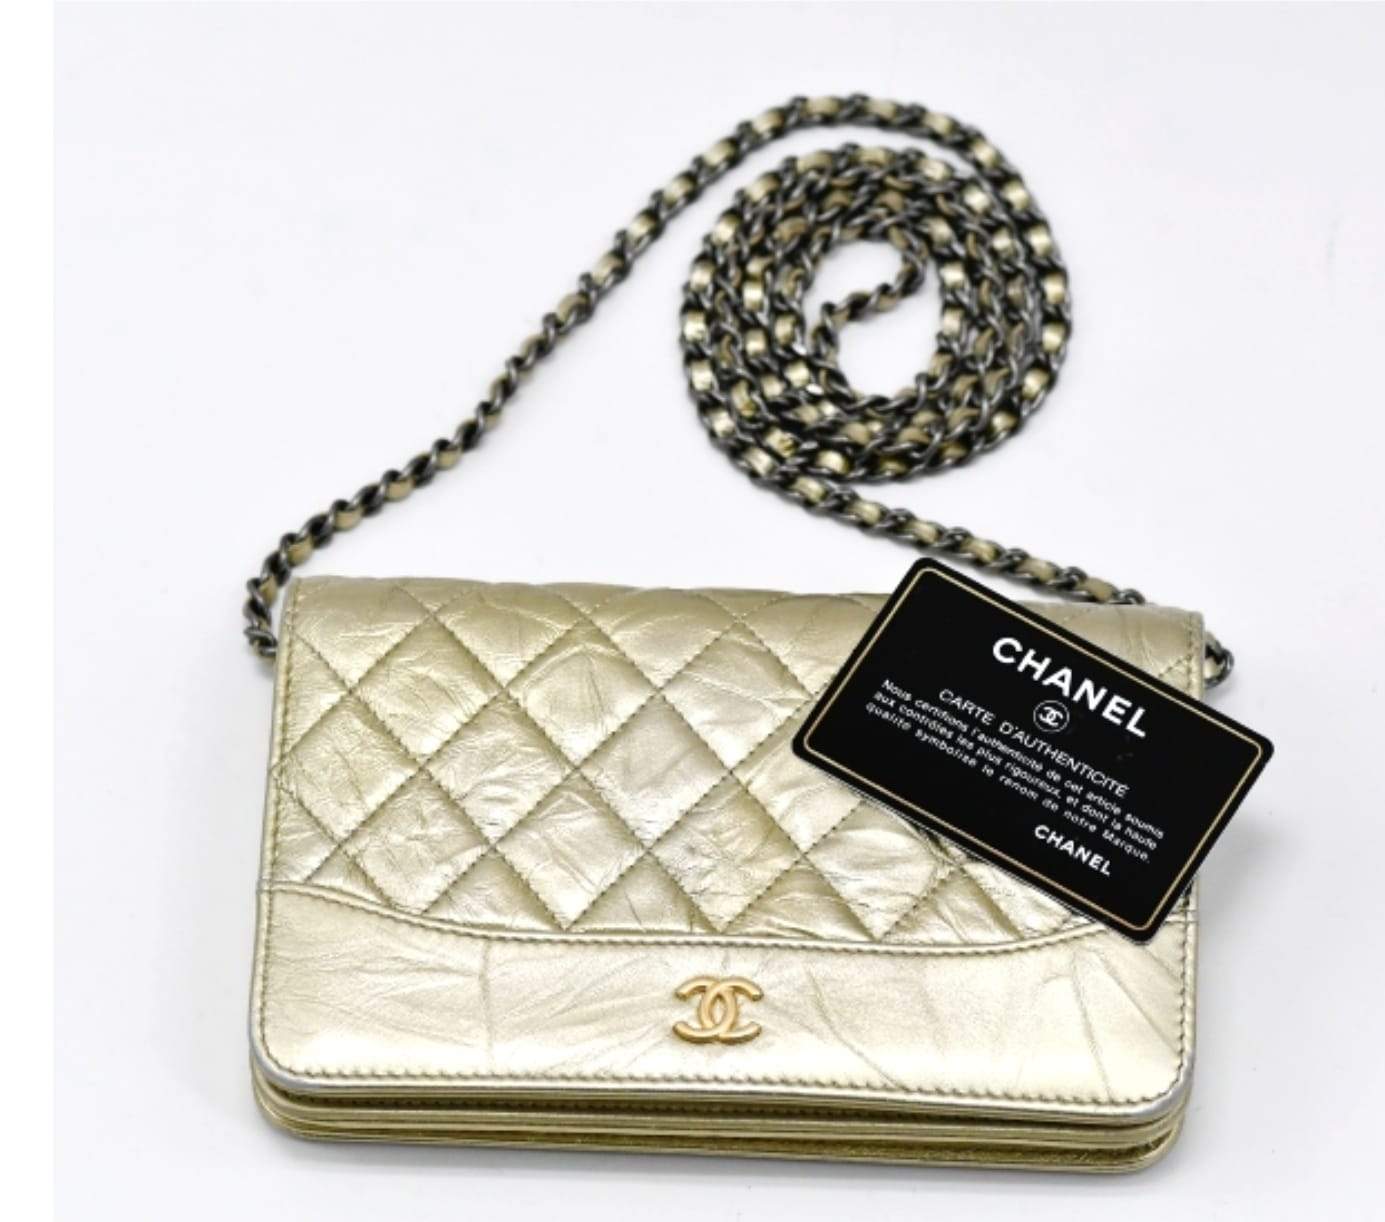 Chanel Gabrielle Wallet on Chain shoulder bag in blue and black quilted  leather